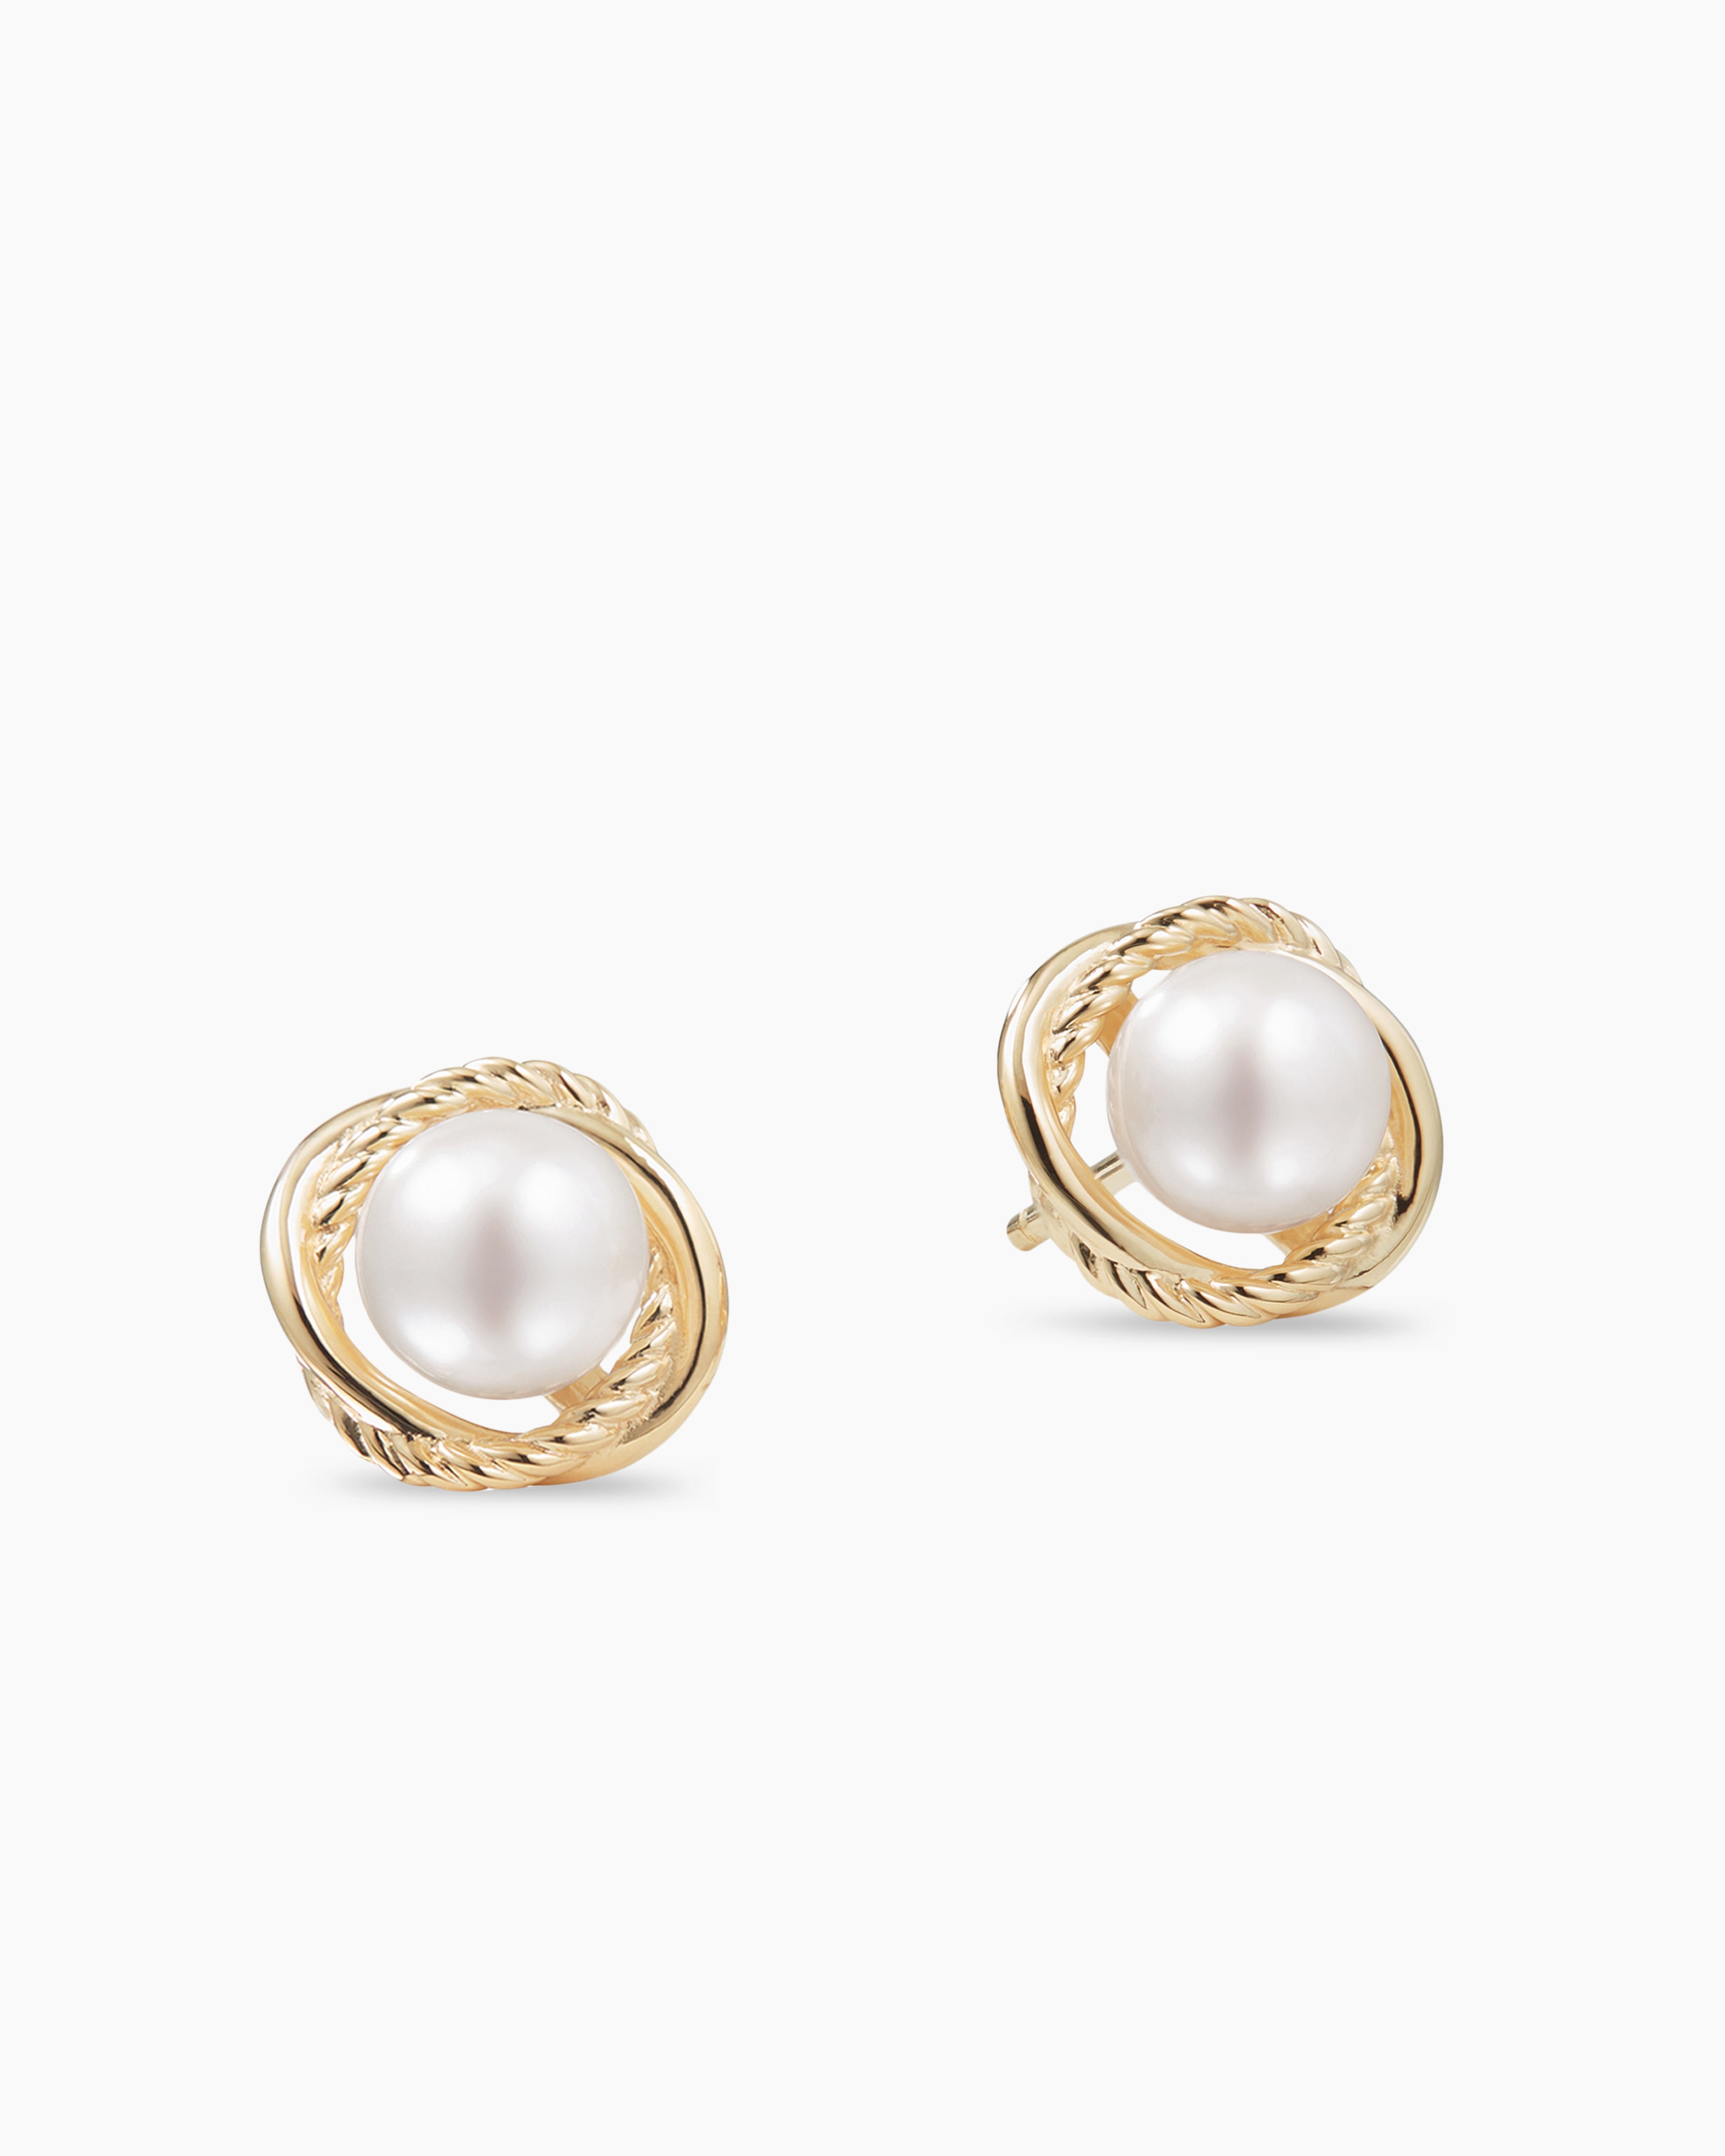 Crossover Stud Earrings in Sterling Silver with 18K Yellow Gold, 11mm